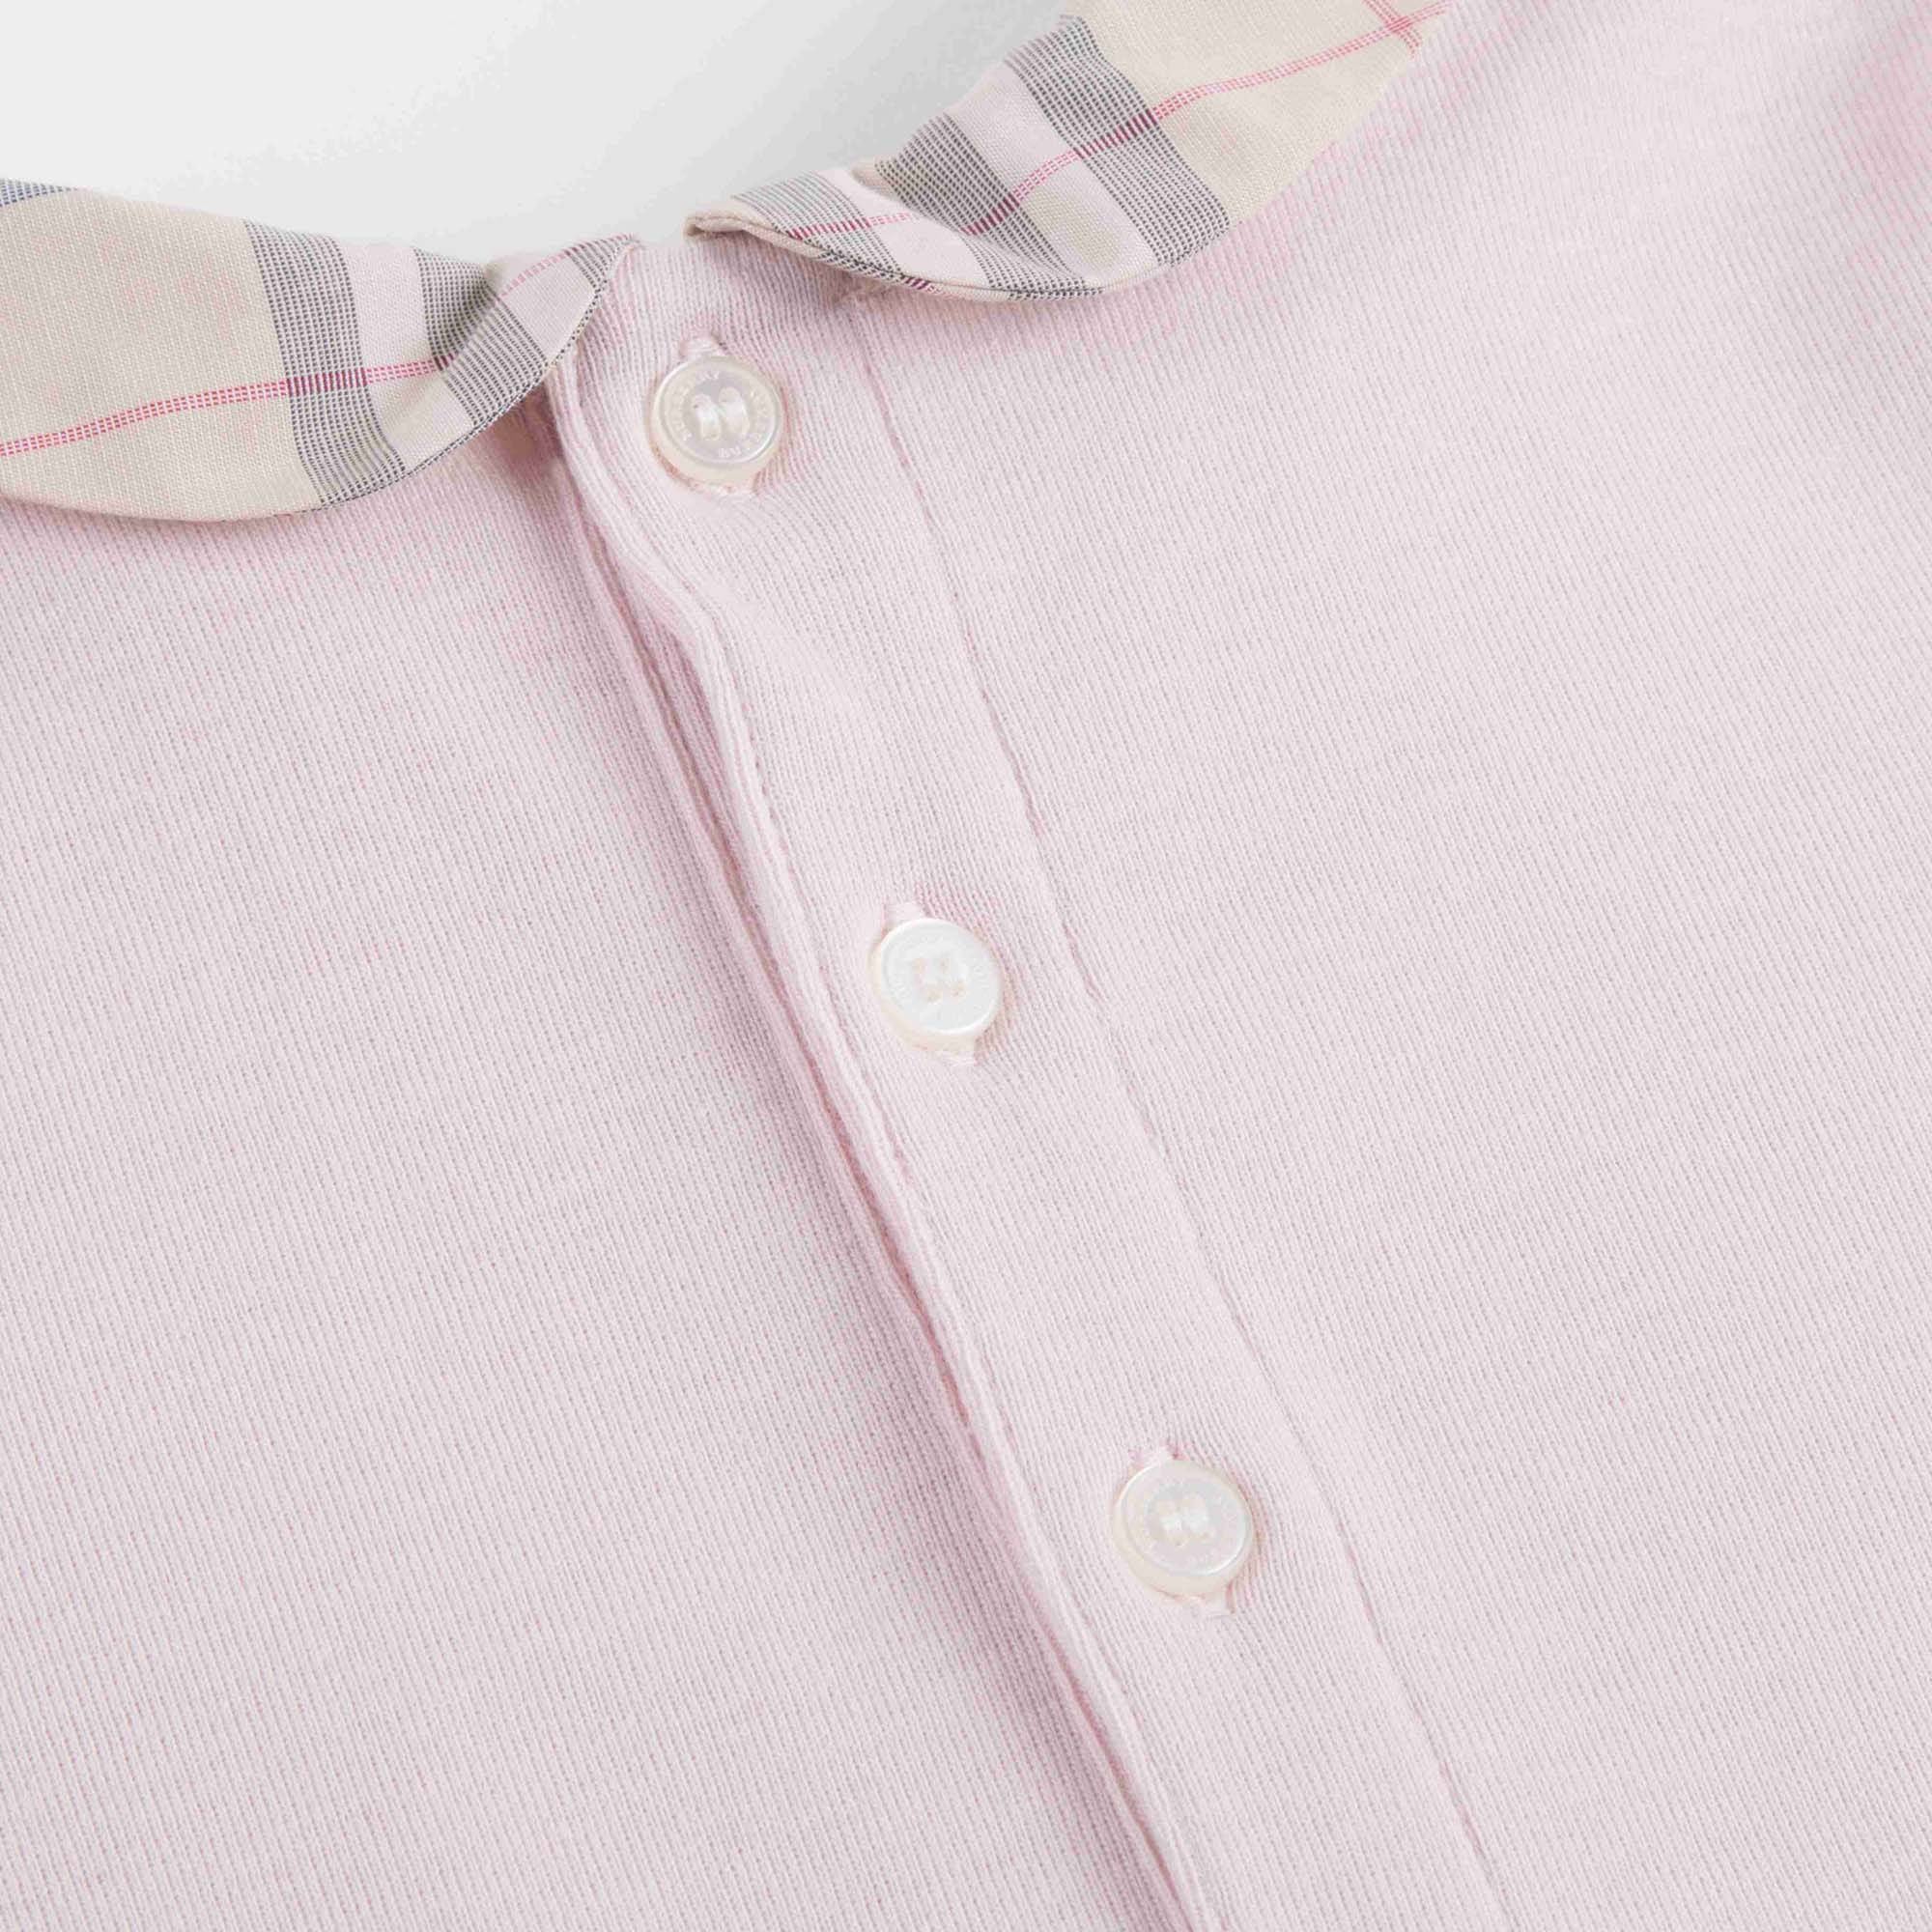 Baby Girls Pink Cotton Body With Check Collar